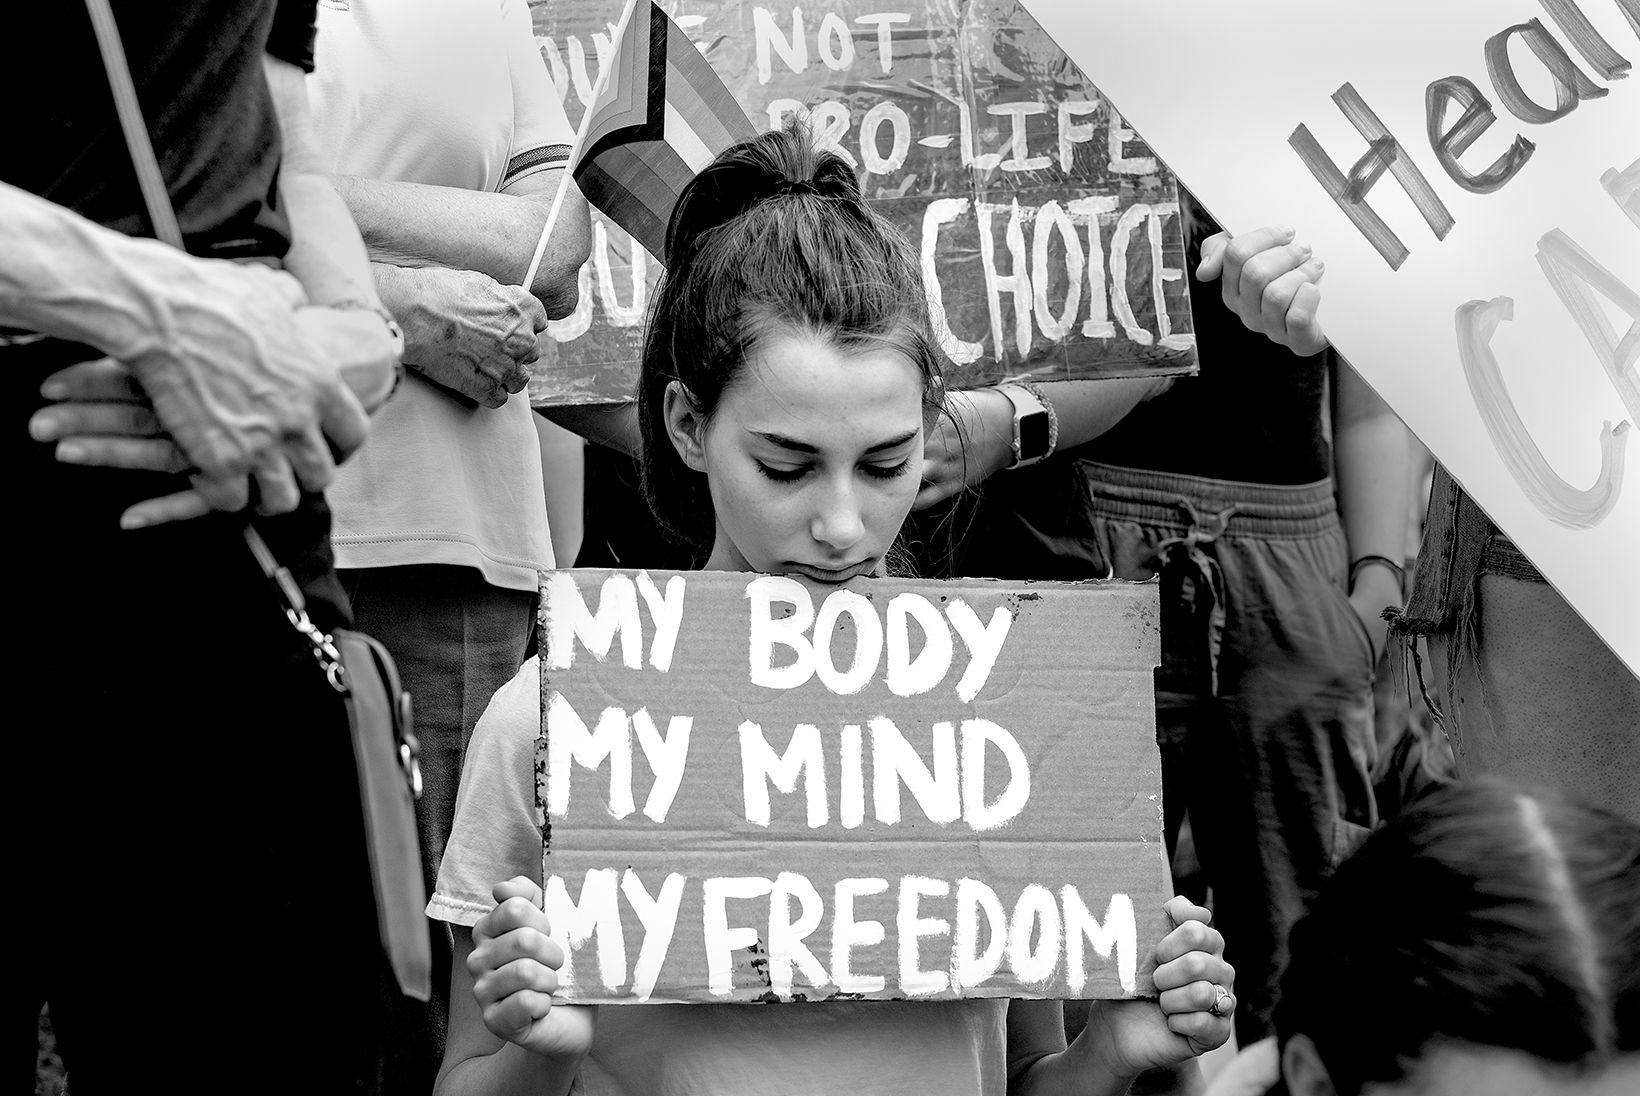 A young woman at an abortion rights rally looks down at the small cardboard sign she holds that says “My Body, My Mind, My Freedom” in white hand-lettering.